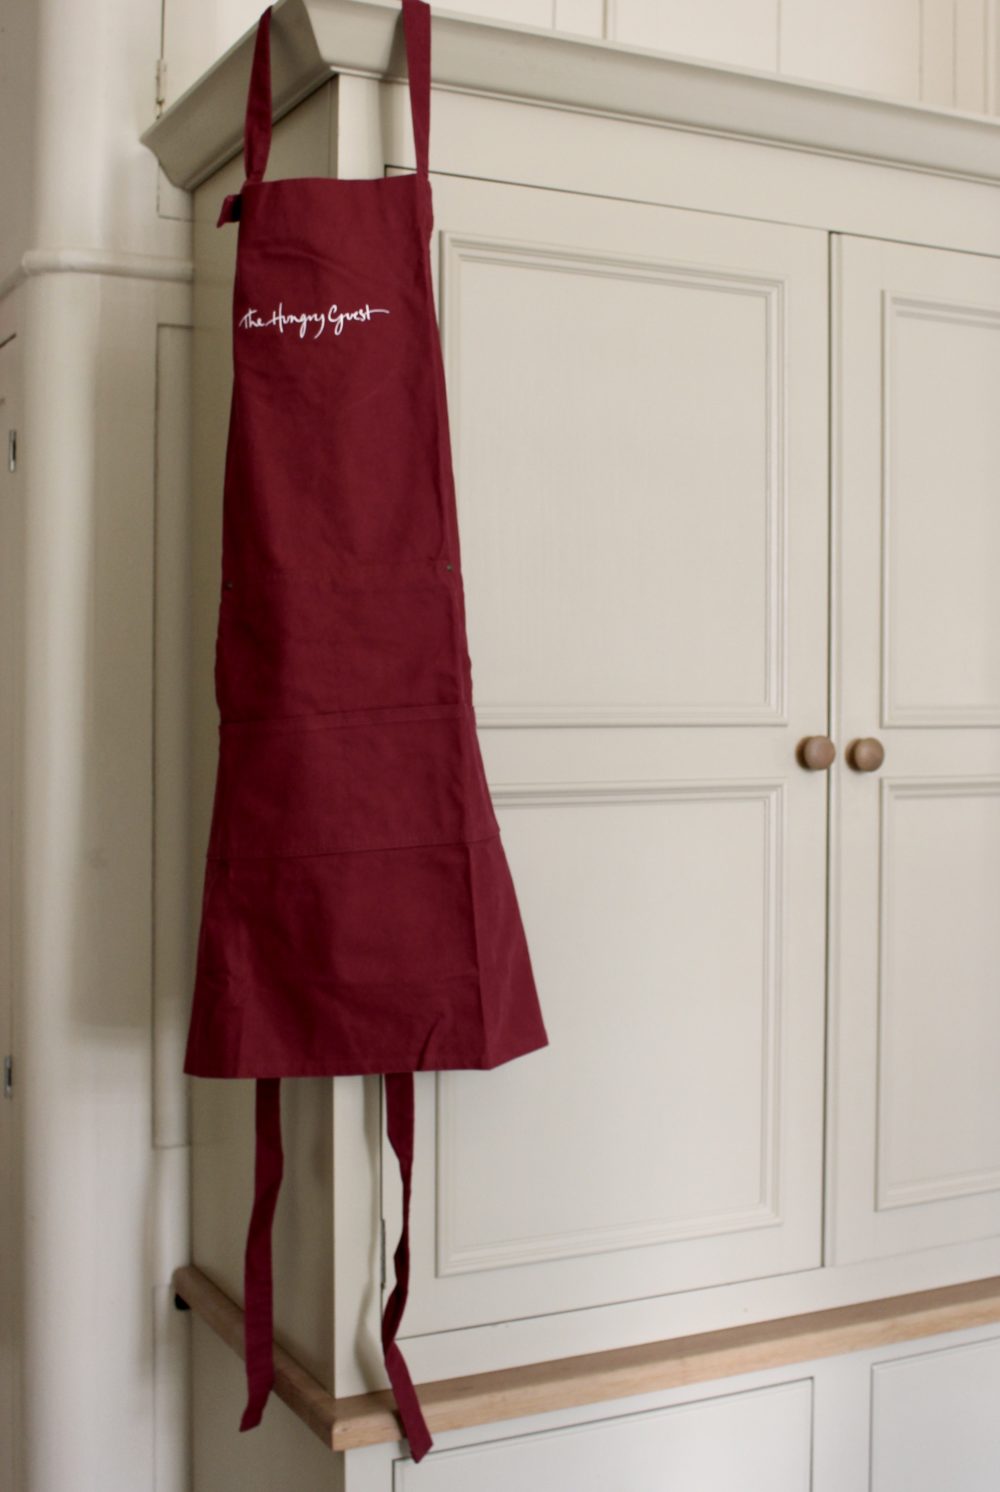 Image of the hungry guest apron hung up